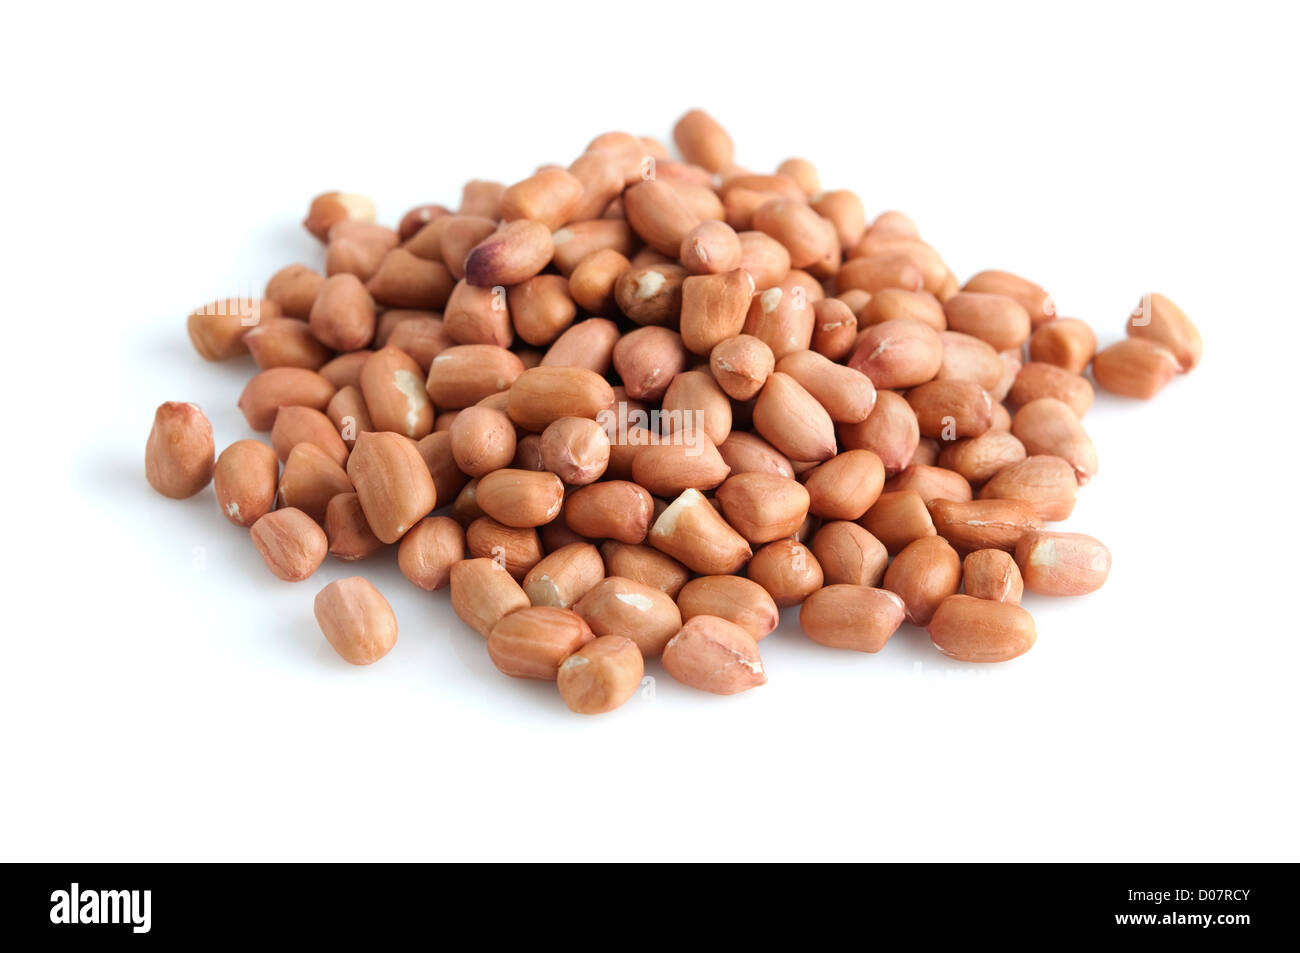 Pile of peanuts with skin isolated on white. Stock Photo